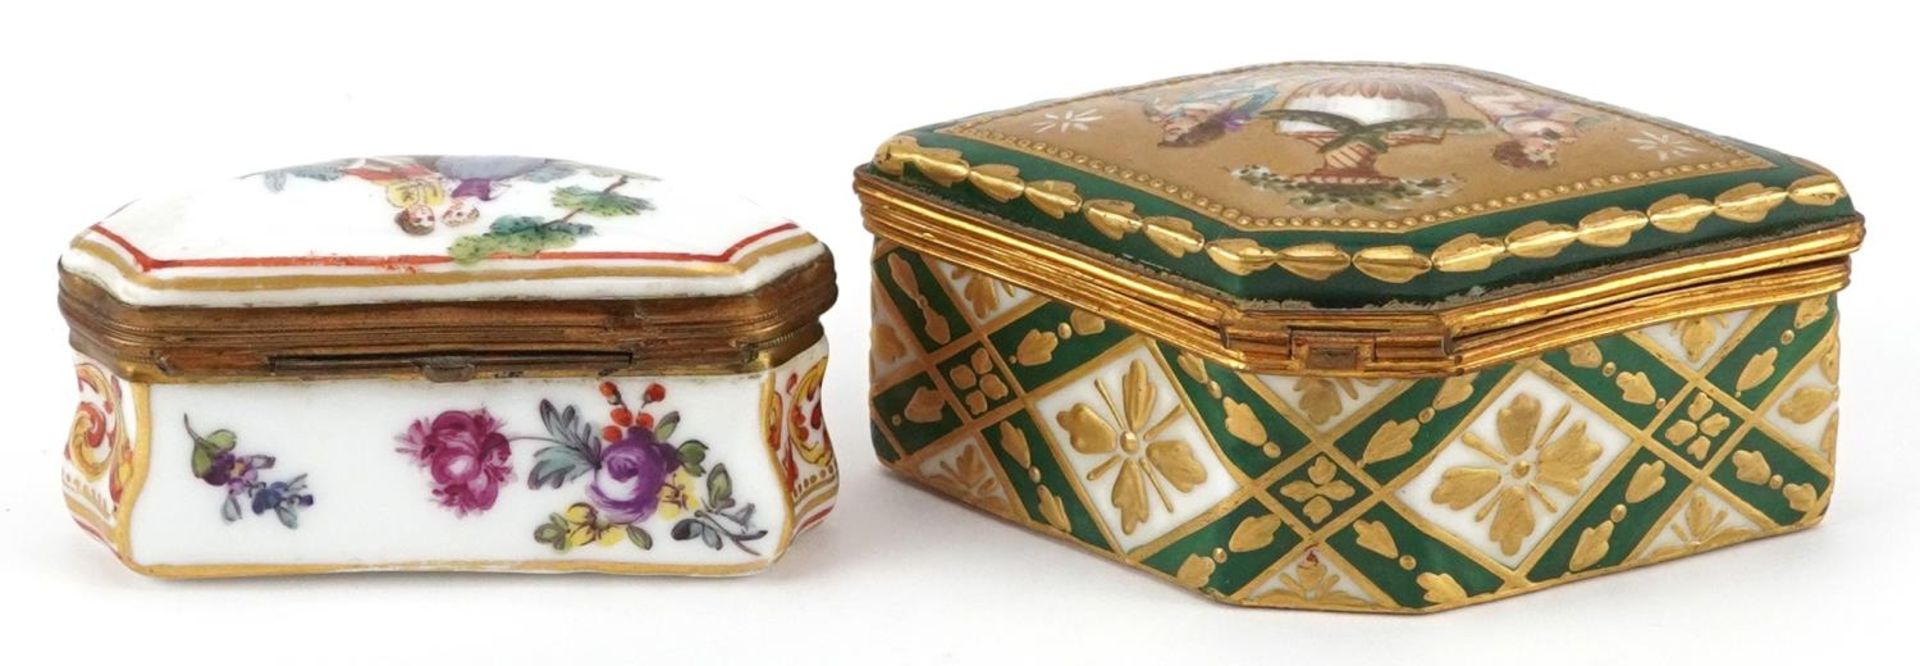 Two 19th century European snuff boxes including a Sevres example in the form of a diamond hand - Bild 3 aus 4